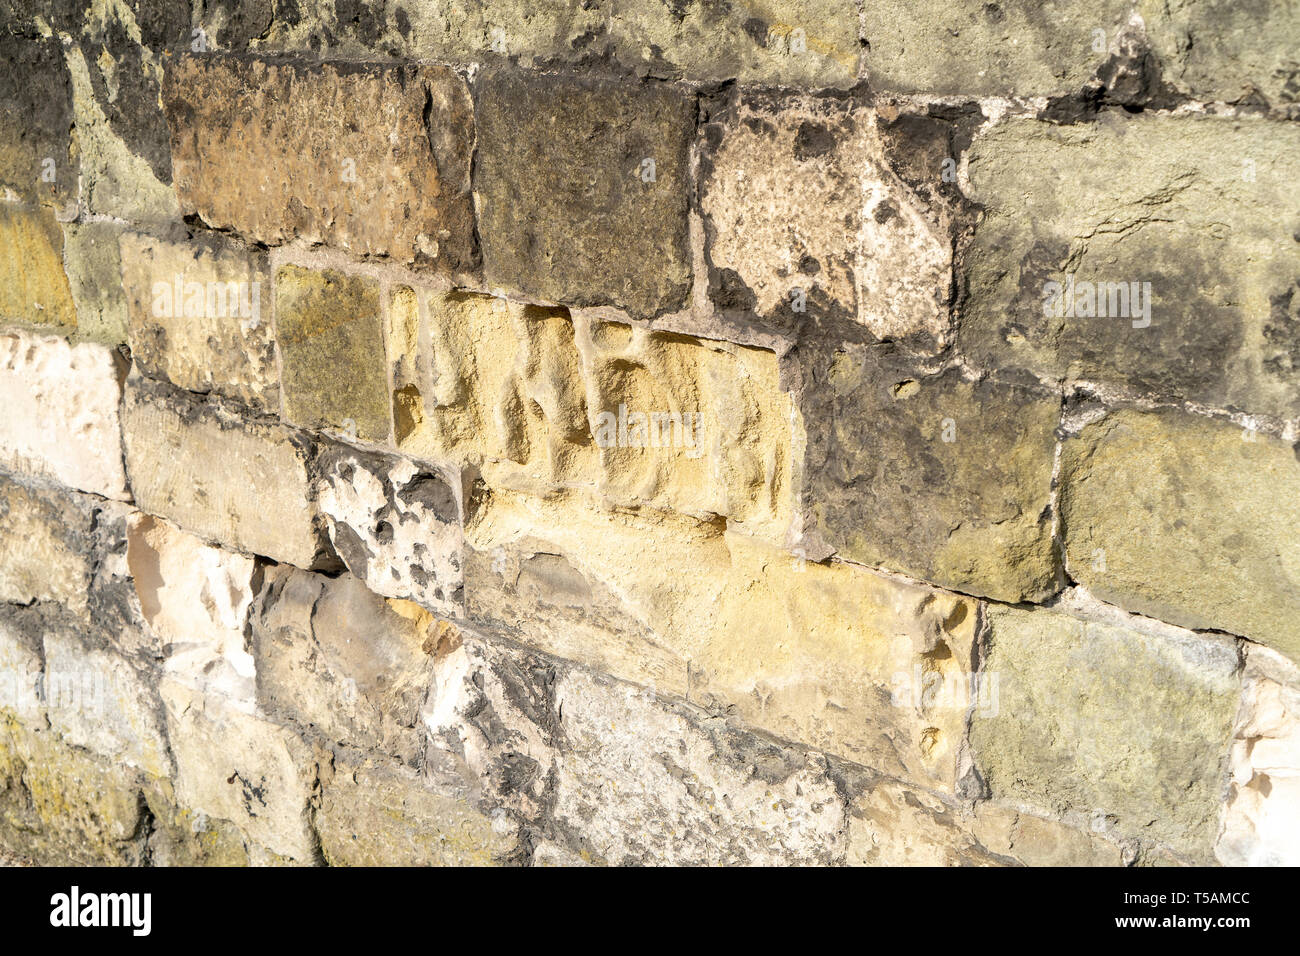 Erosion of stone blocks in a wall Stock Photo